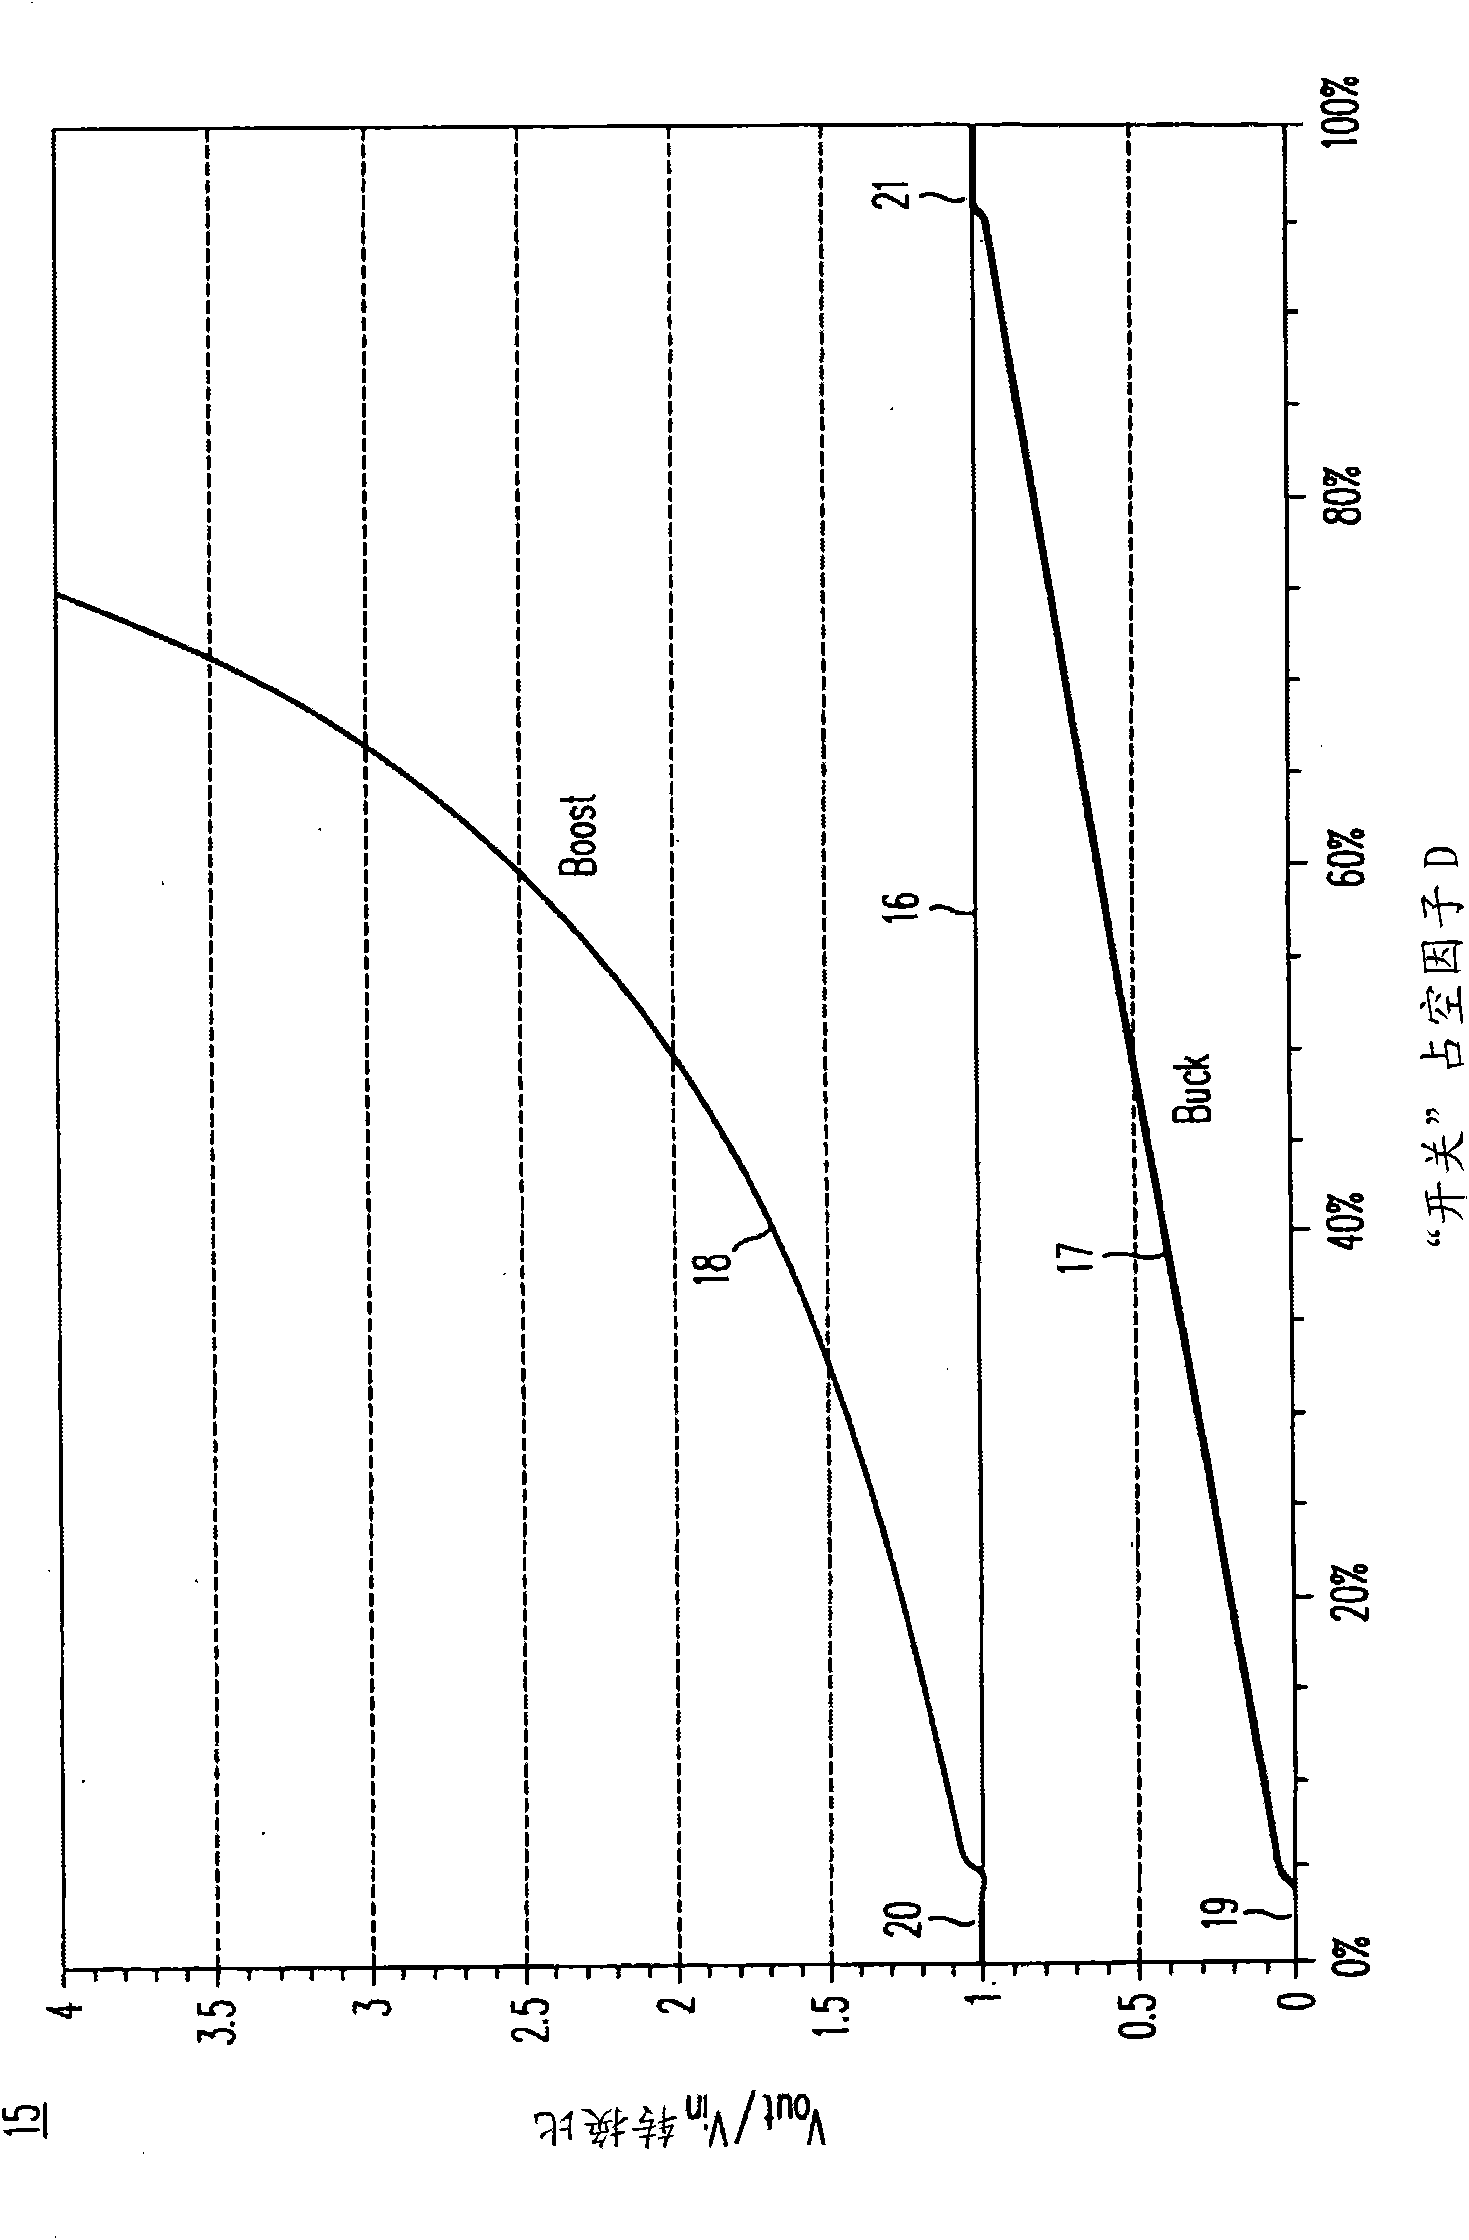 High-efficiency dc/dc voltage converter including up inductive switching pre-regulator and capacitive switching post-converter